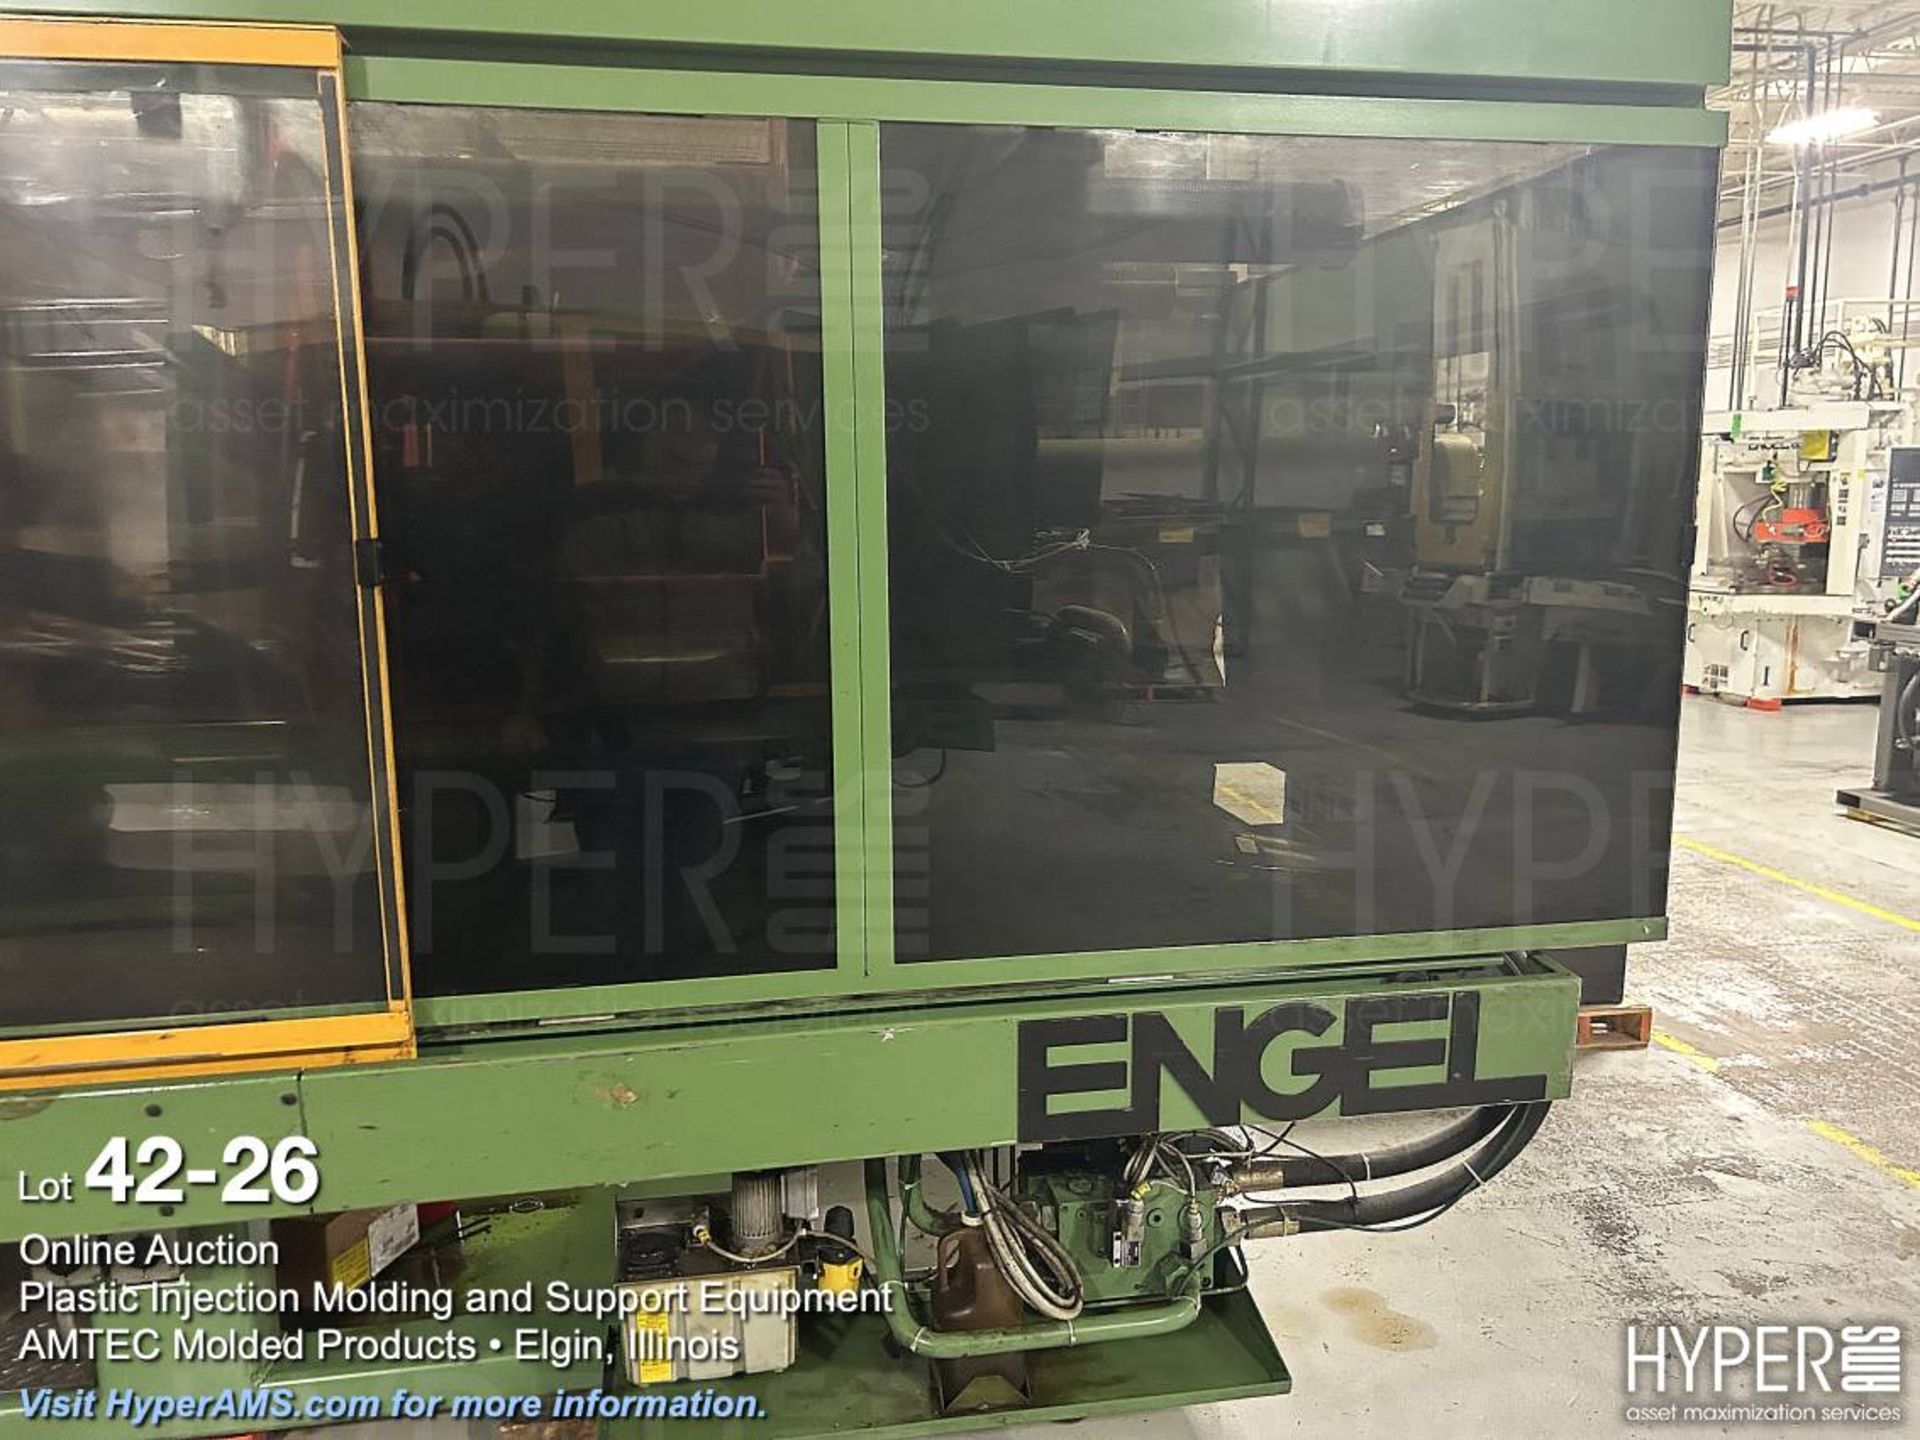 Engel ES2050/400AH toggle clamp plastic injection molding machine - Image 26 of 28